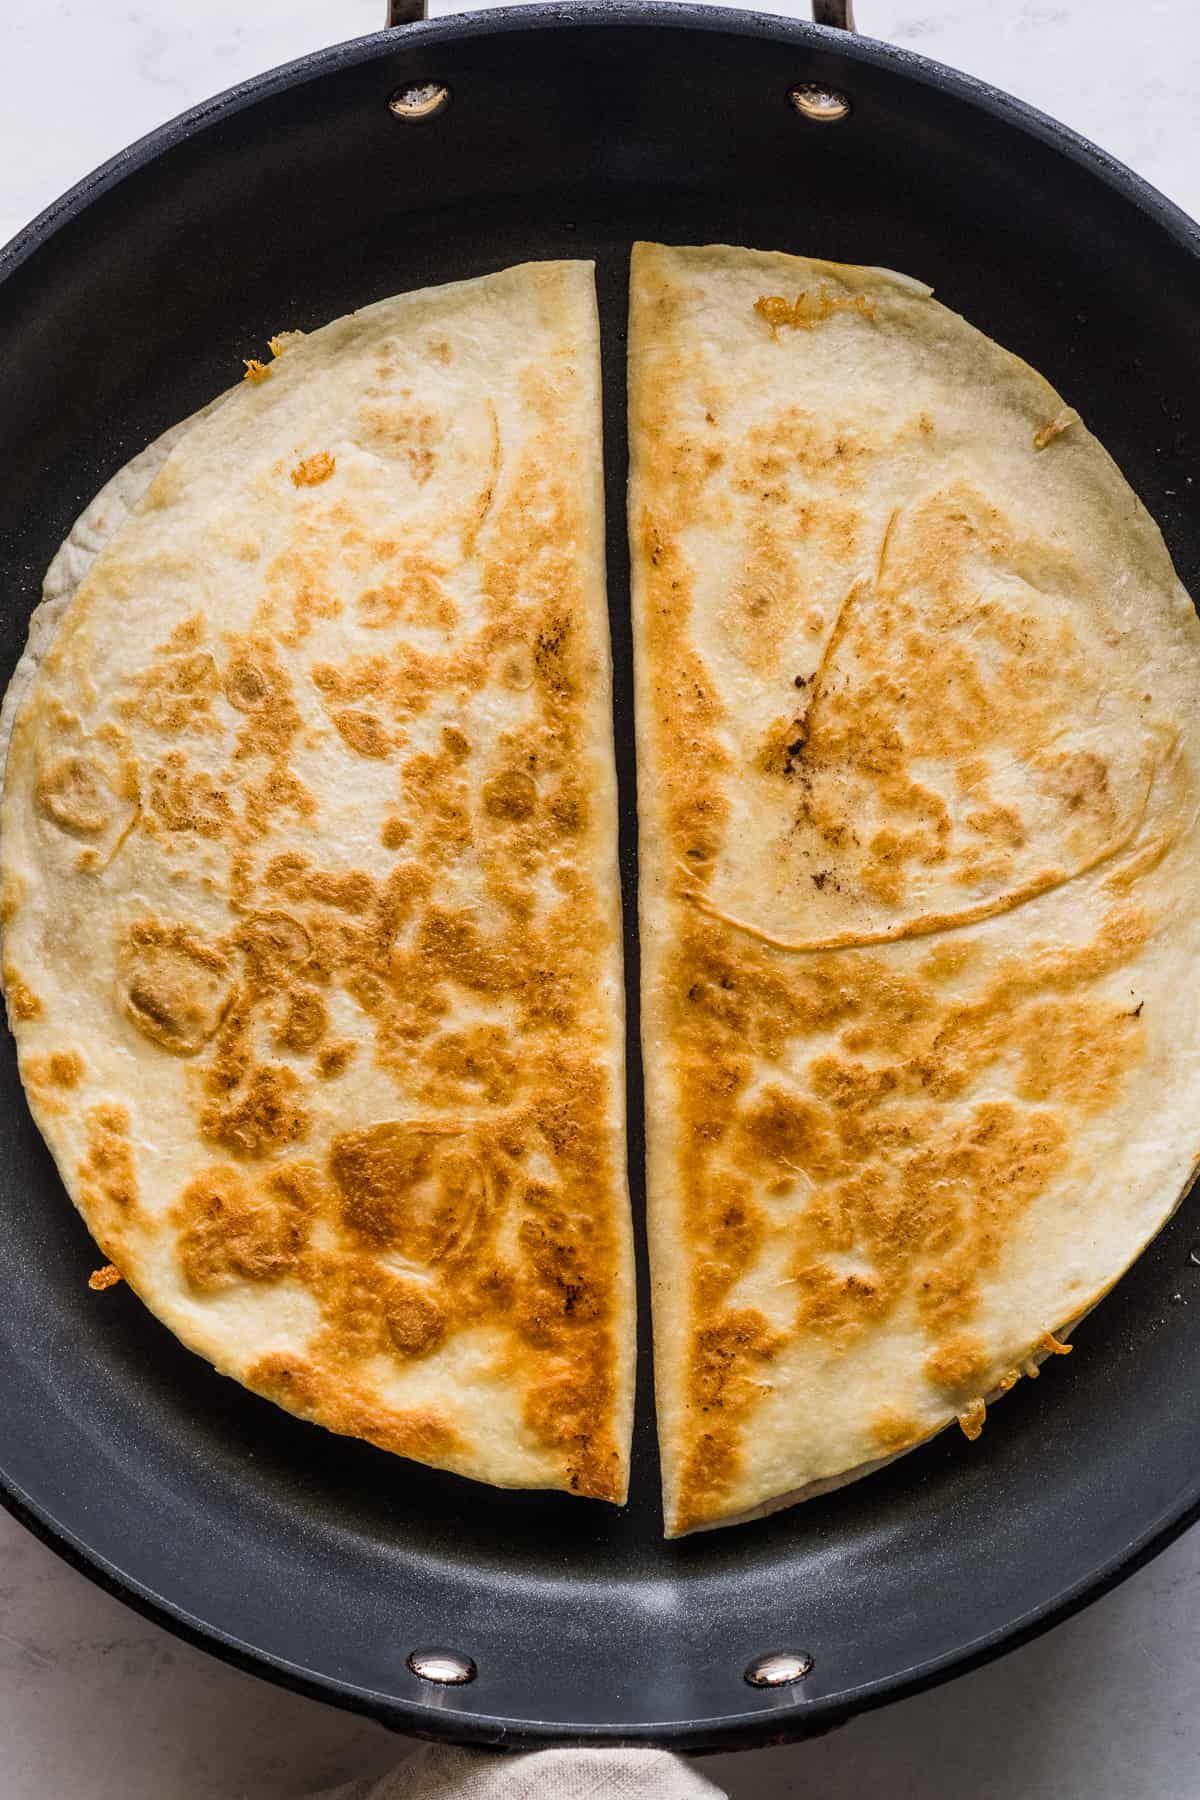 Buffalo chicken quesadillas being cooked in a large skillet.